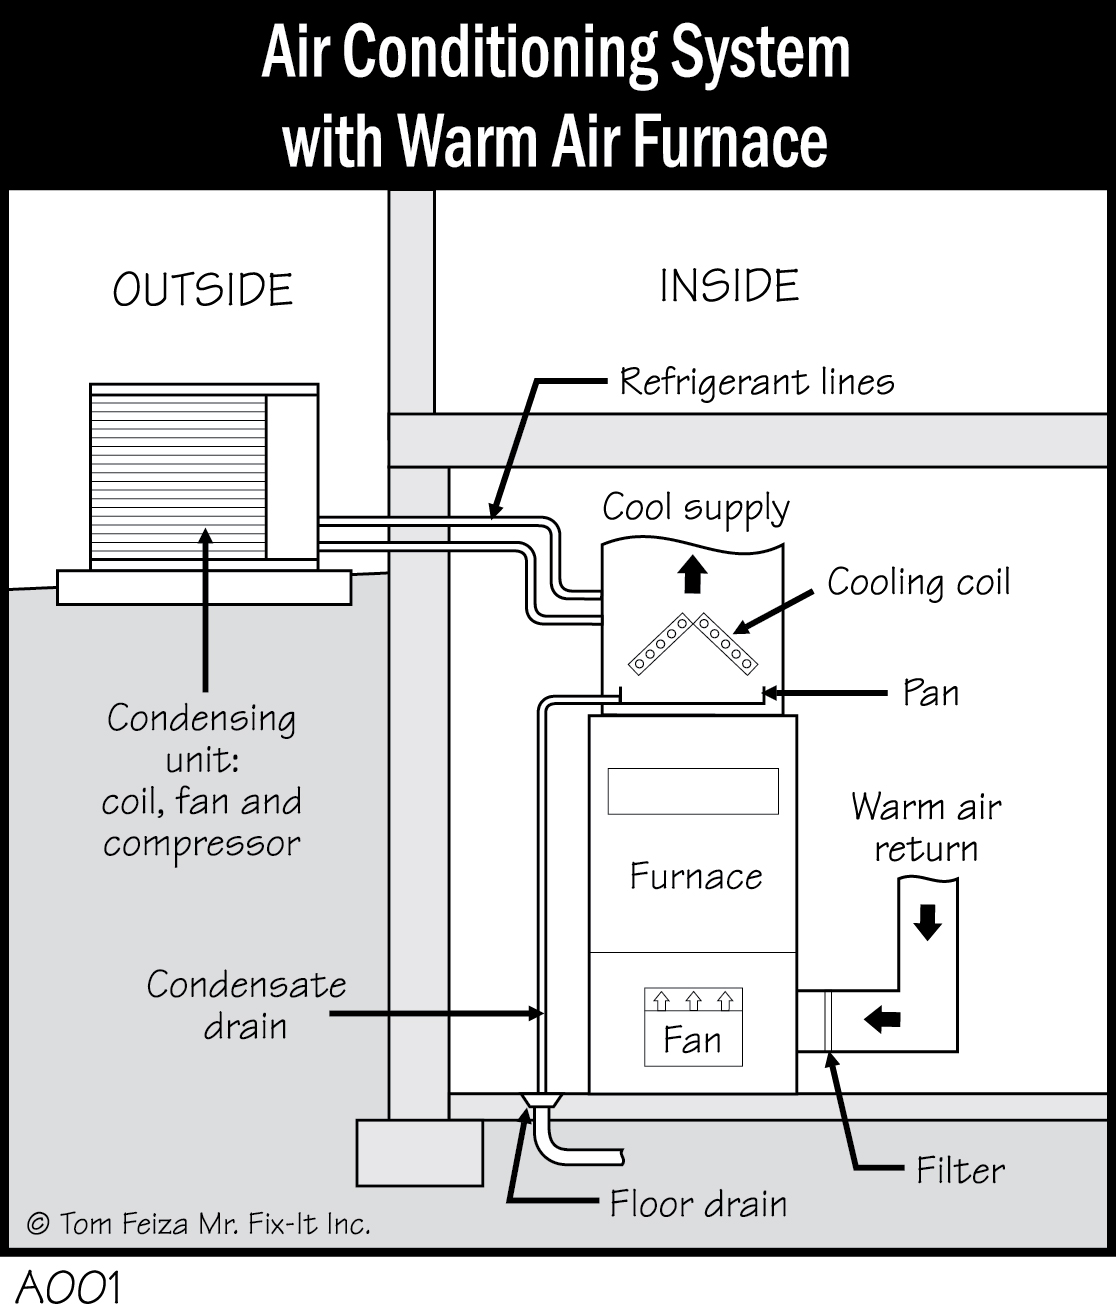 A001 - Air Conditioning System with Warm Air Furnace